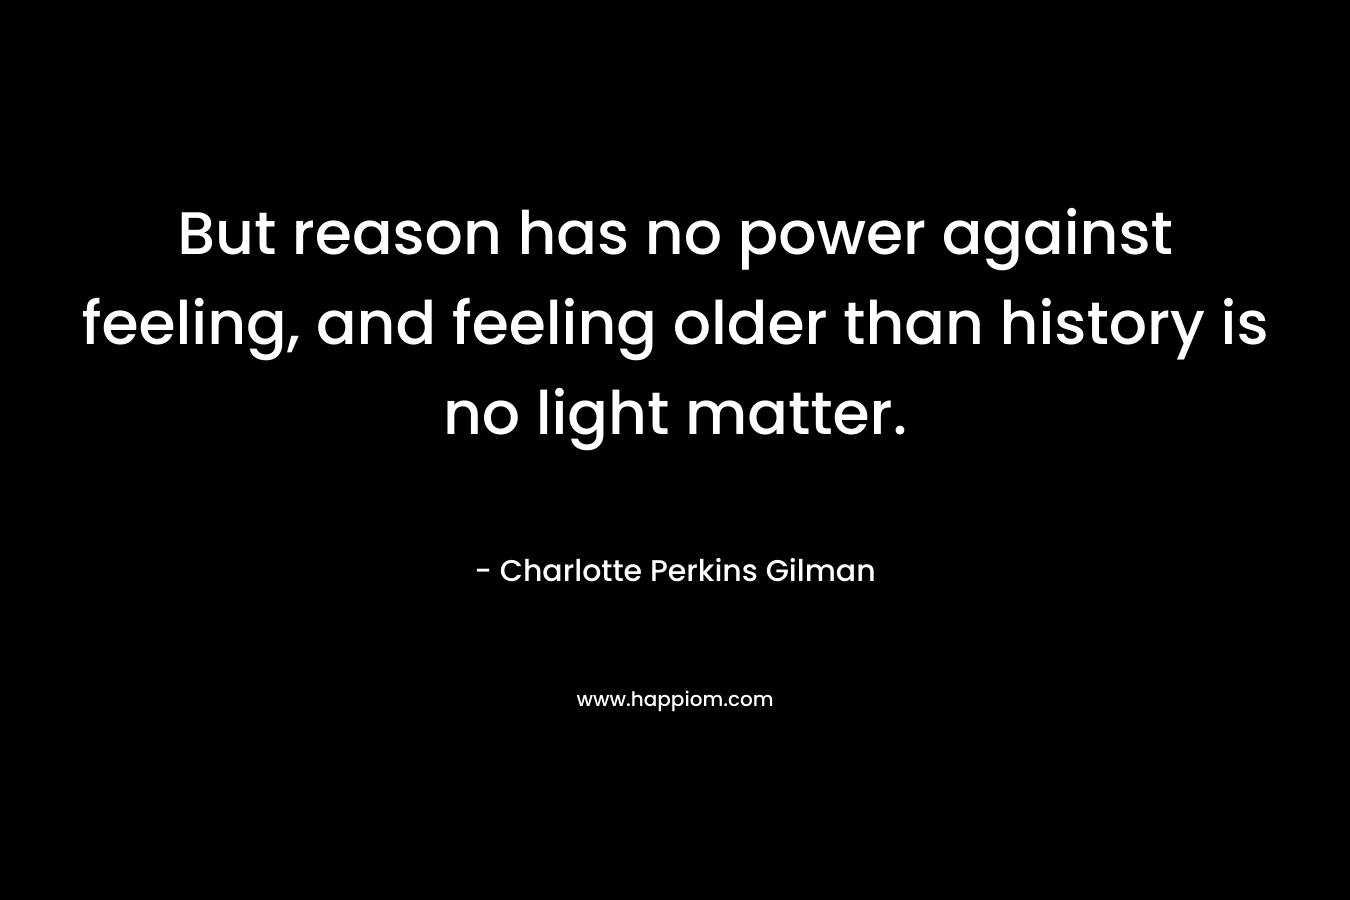 But reason has no power against feeling, and feeling older than history is no light matter. – Charlotte Perkins Gilman